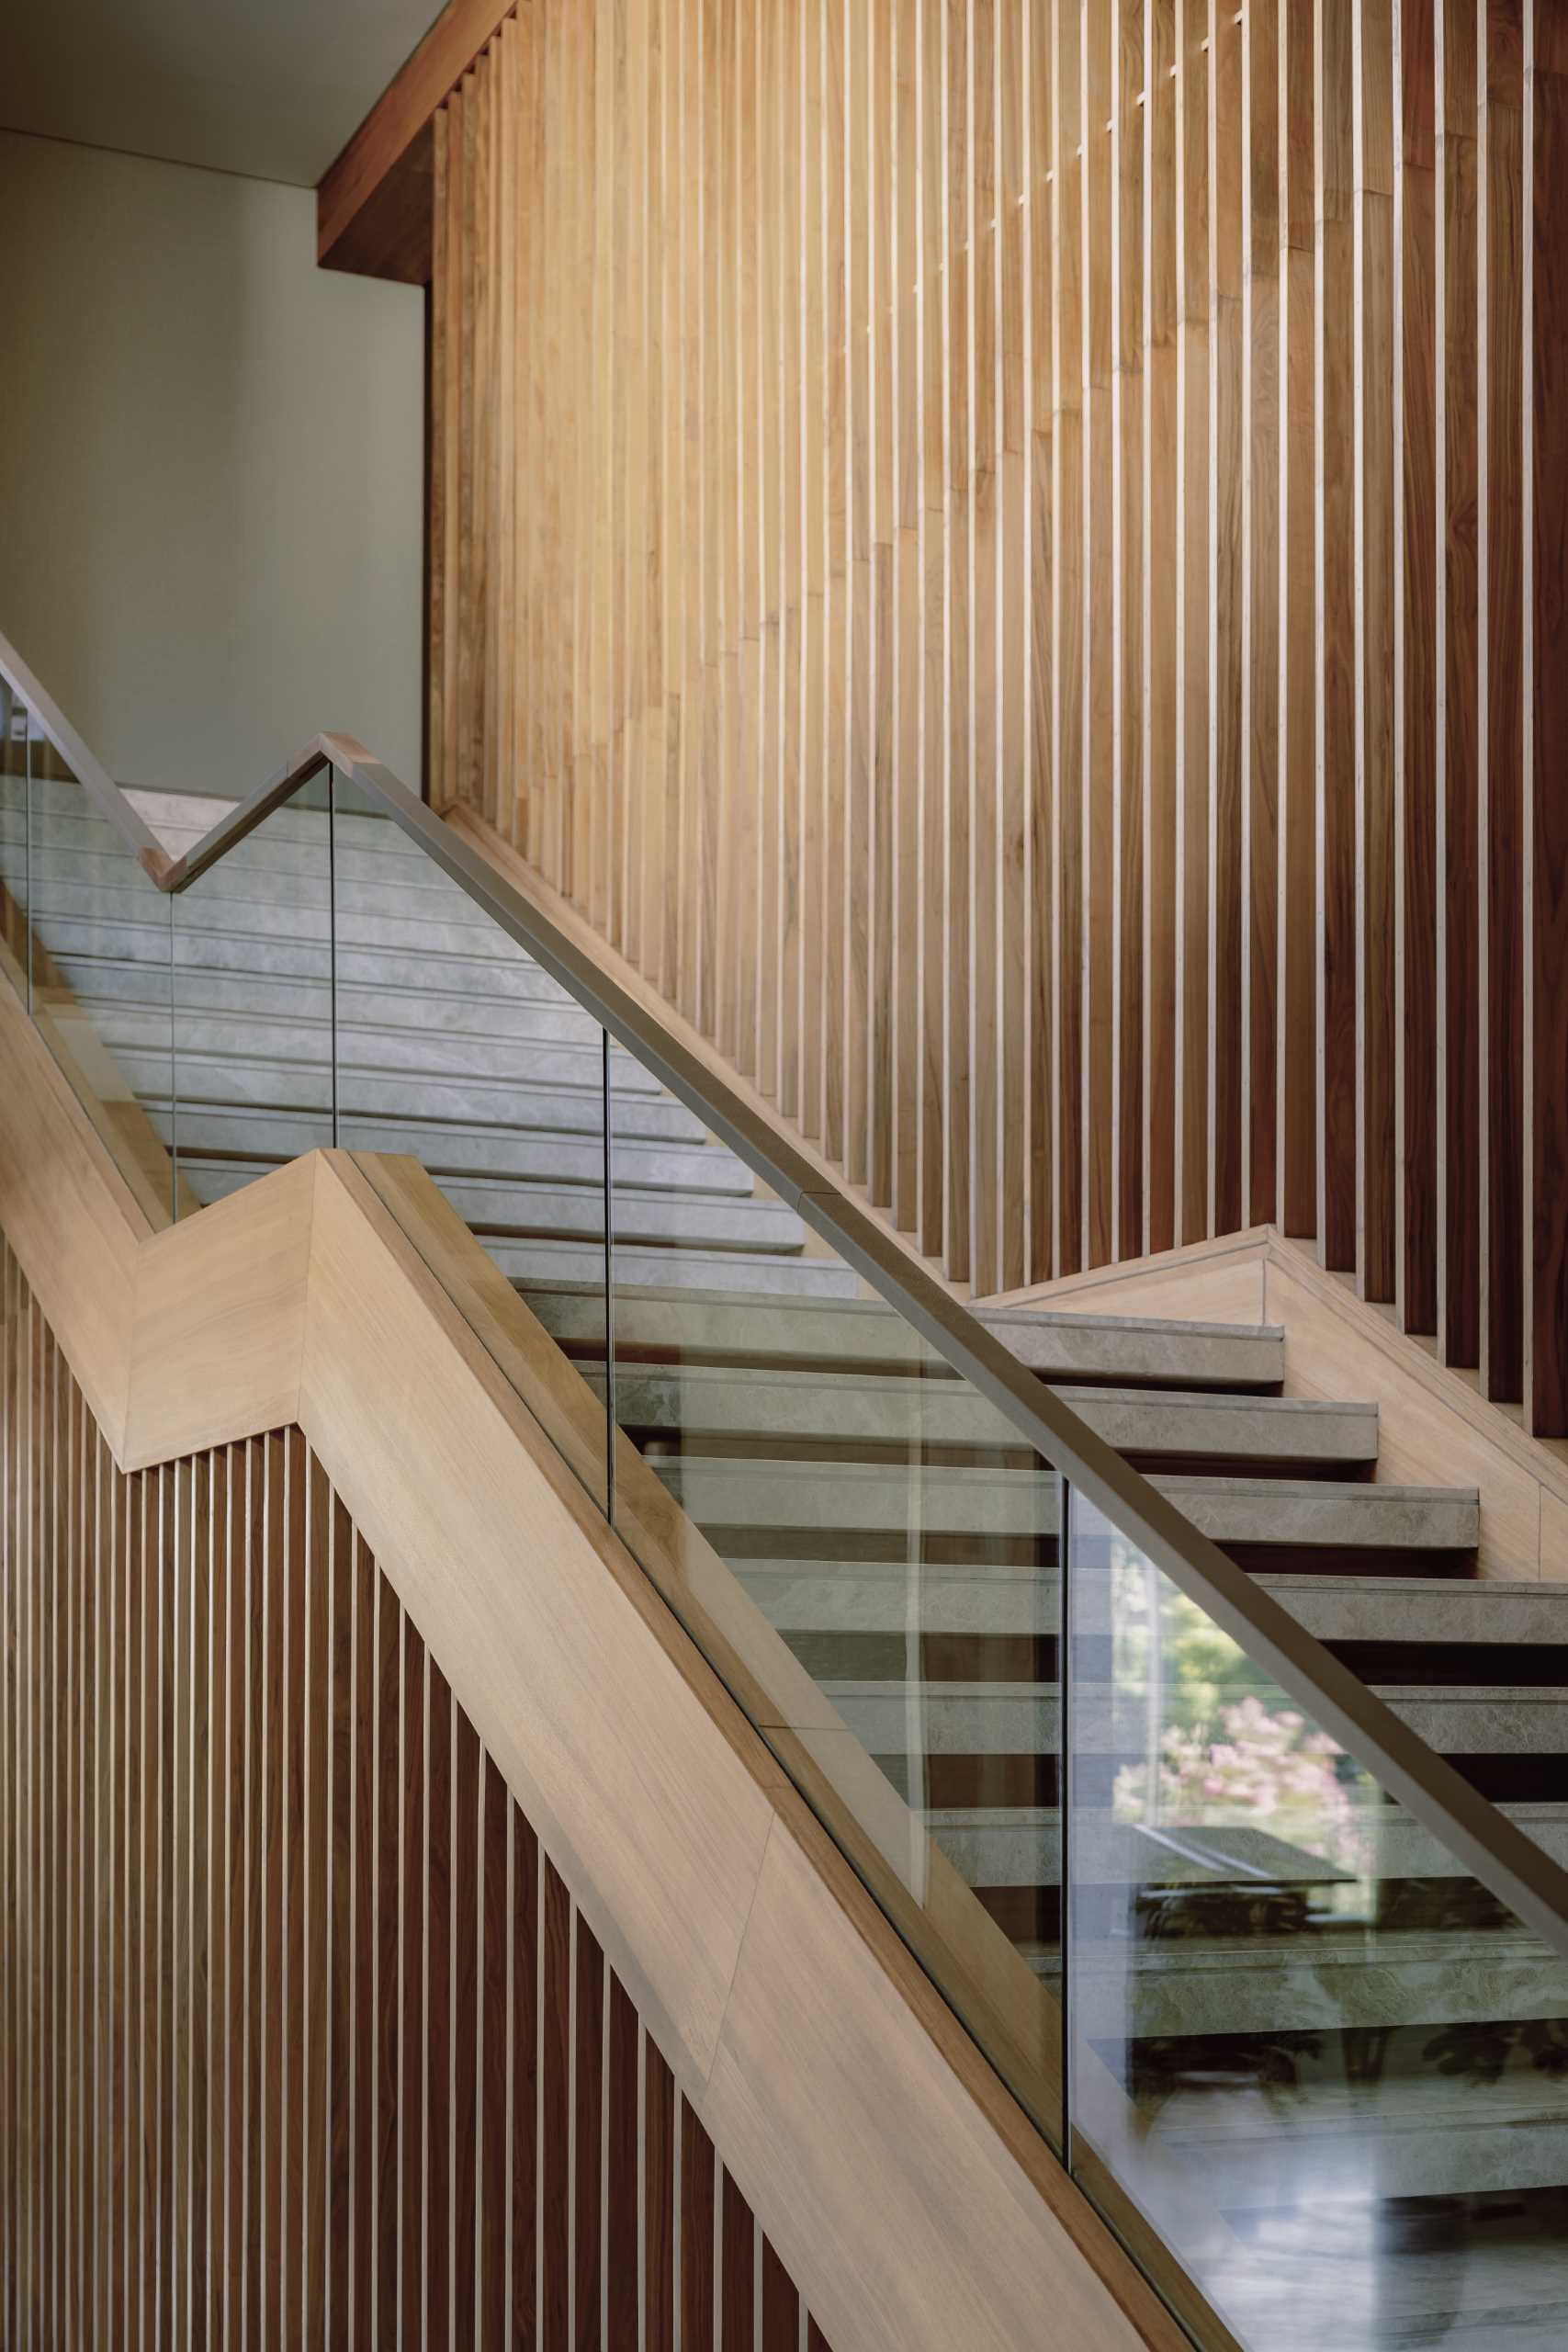 A modern home with a staircase that includes a glass and wood handrail.